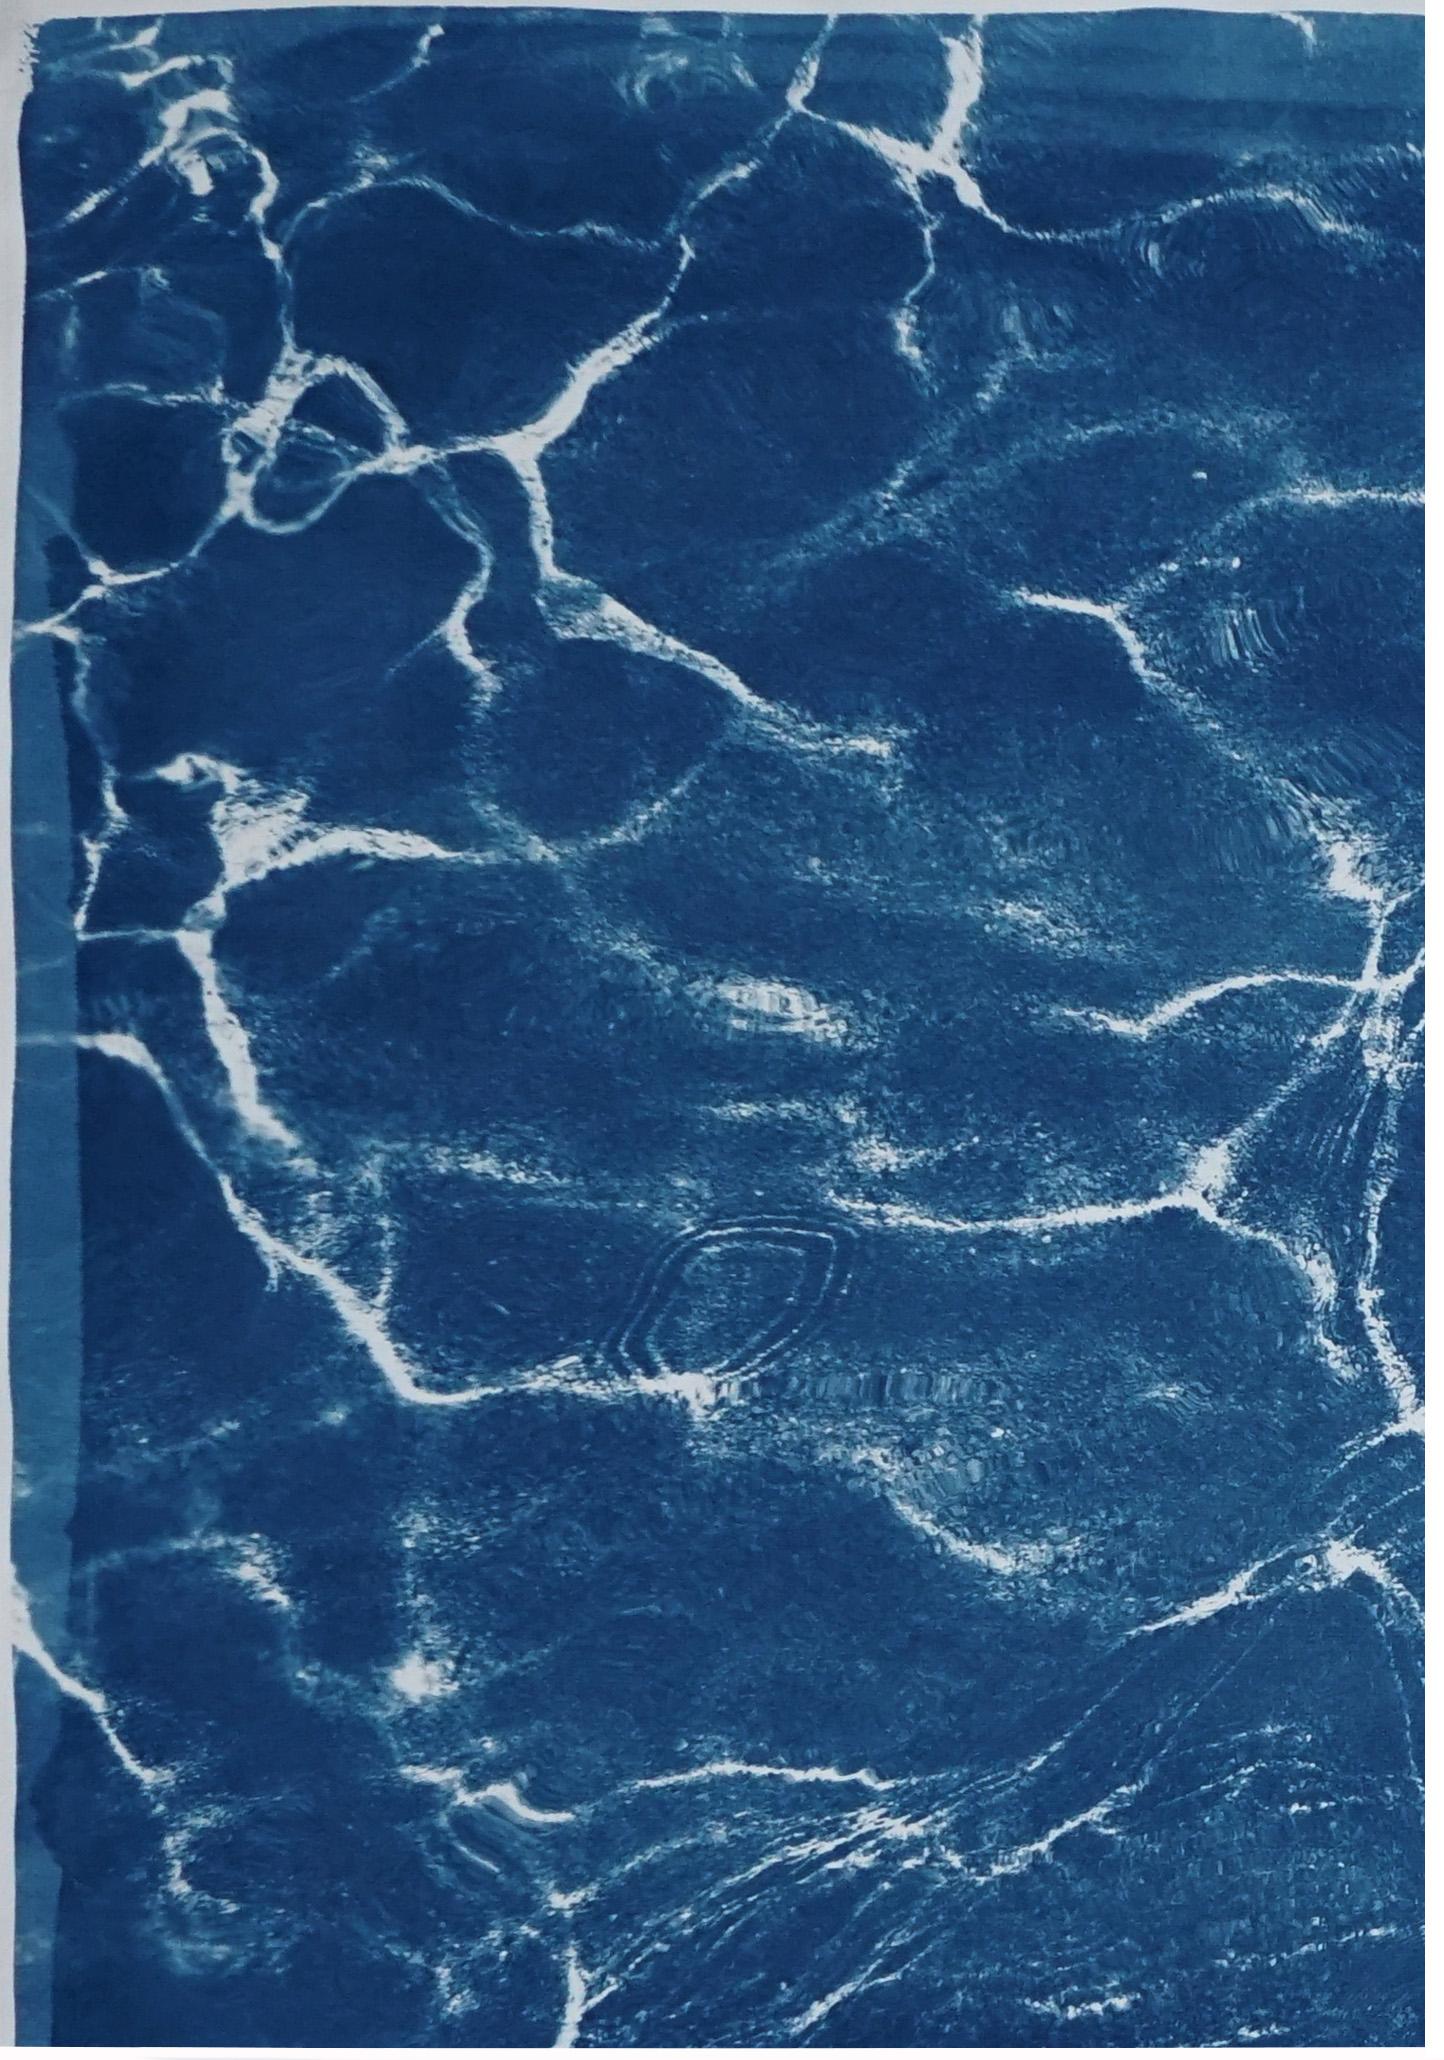 This is an exclusive handprinted limited edition cyanotype.

This beautiful triptych is called 